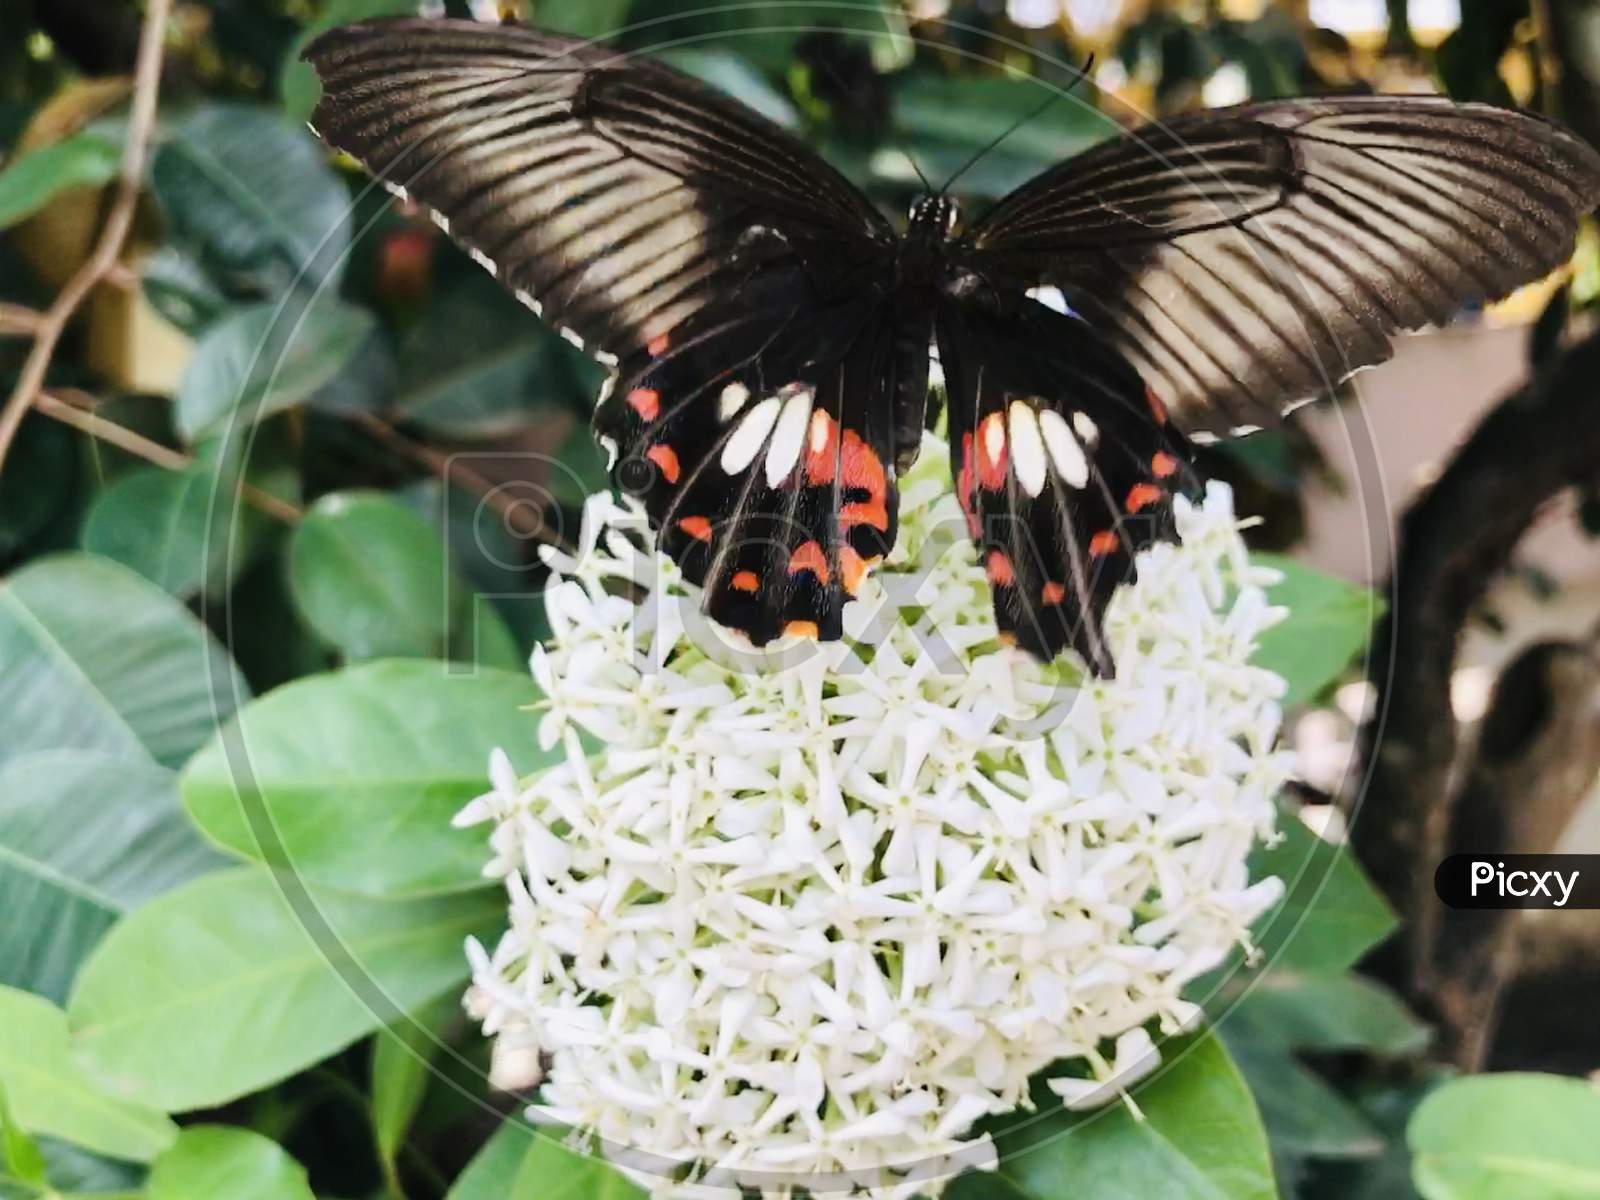 A black butterfly sitting in the white flower